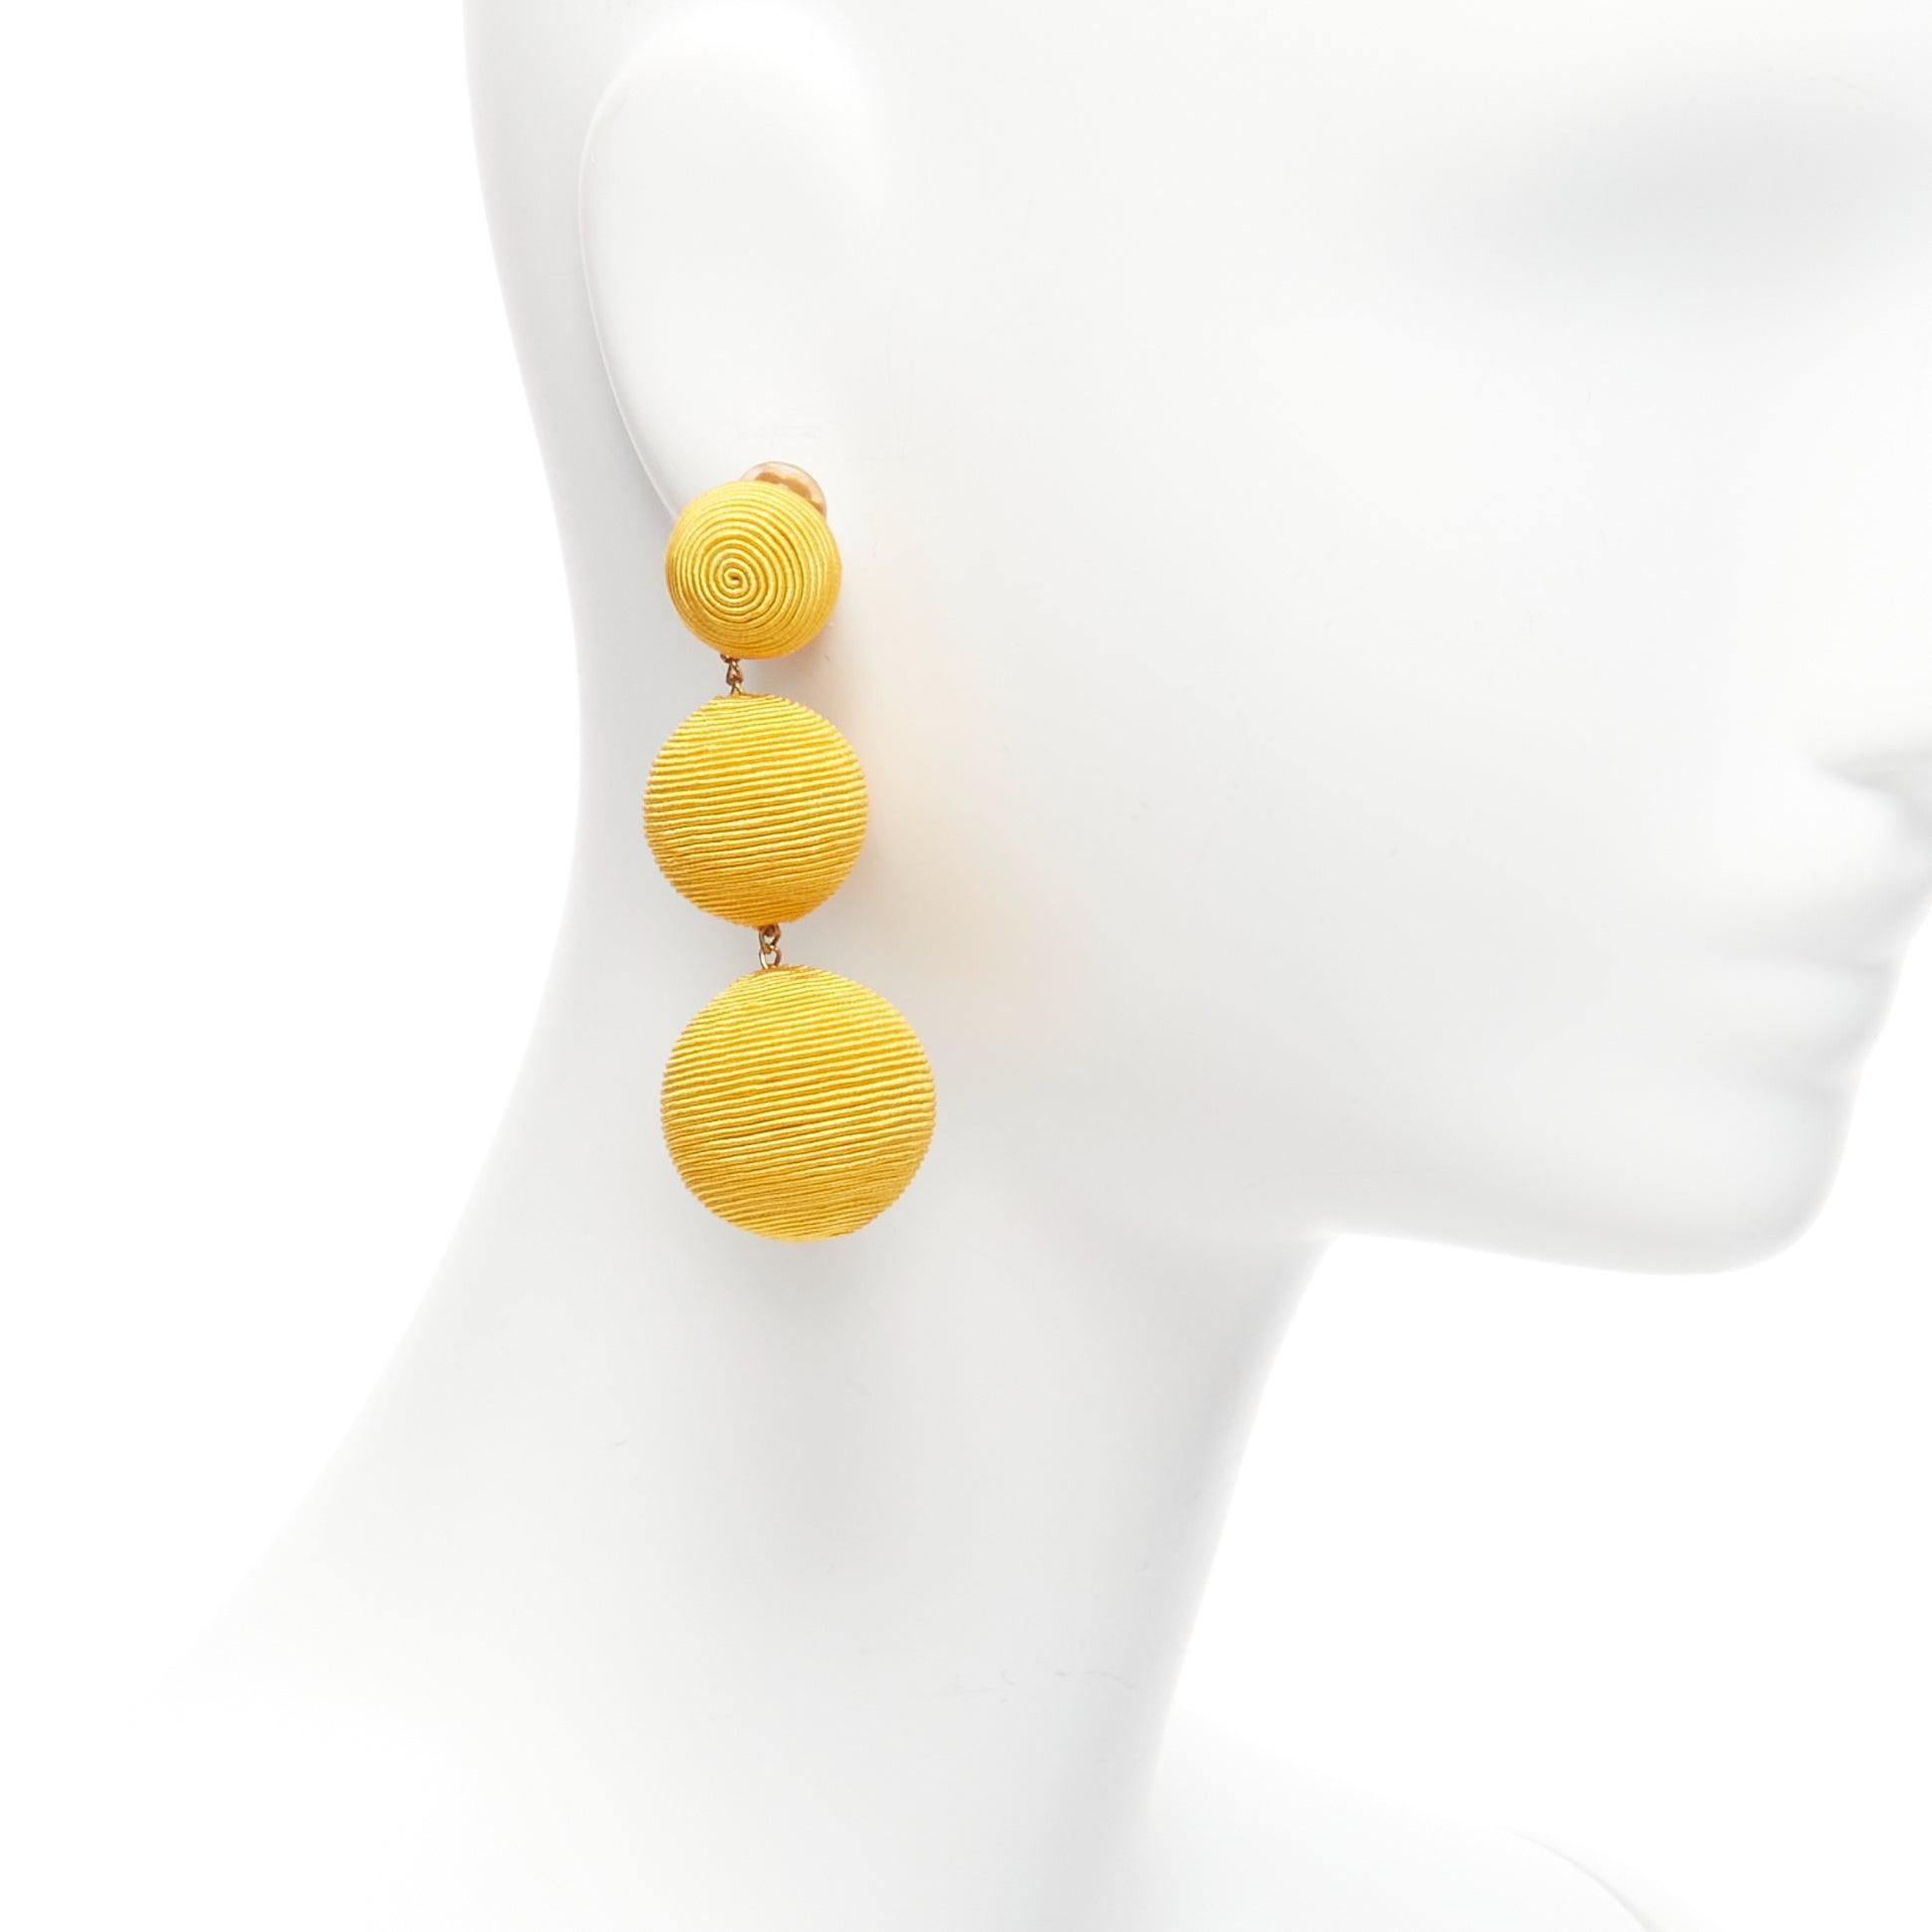 REBECCA DE RAVENEL yellow trio balls dangling clip on earrings Pair
Reference: LNKO/A02208
Brand: Rebecca De Ravenel
Material: Fabric
Color: Yellow
Pattern: Solid
Closure: Clip On
Lining: Gold Metal
Made in: India

CONDITION:
Condition: Excellent,